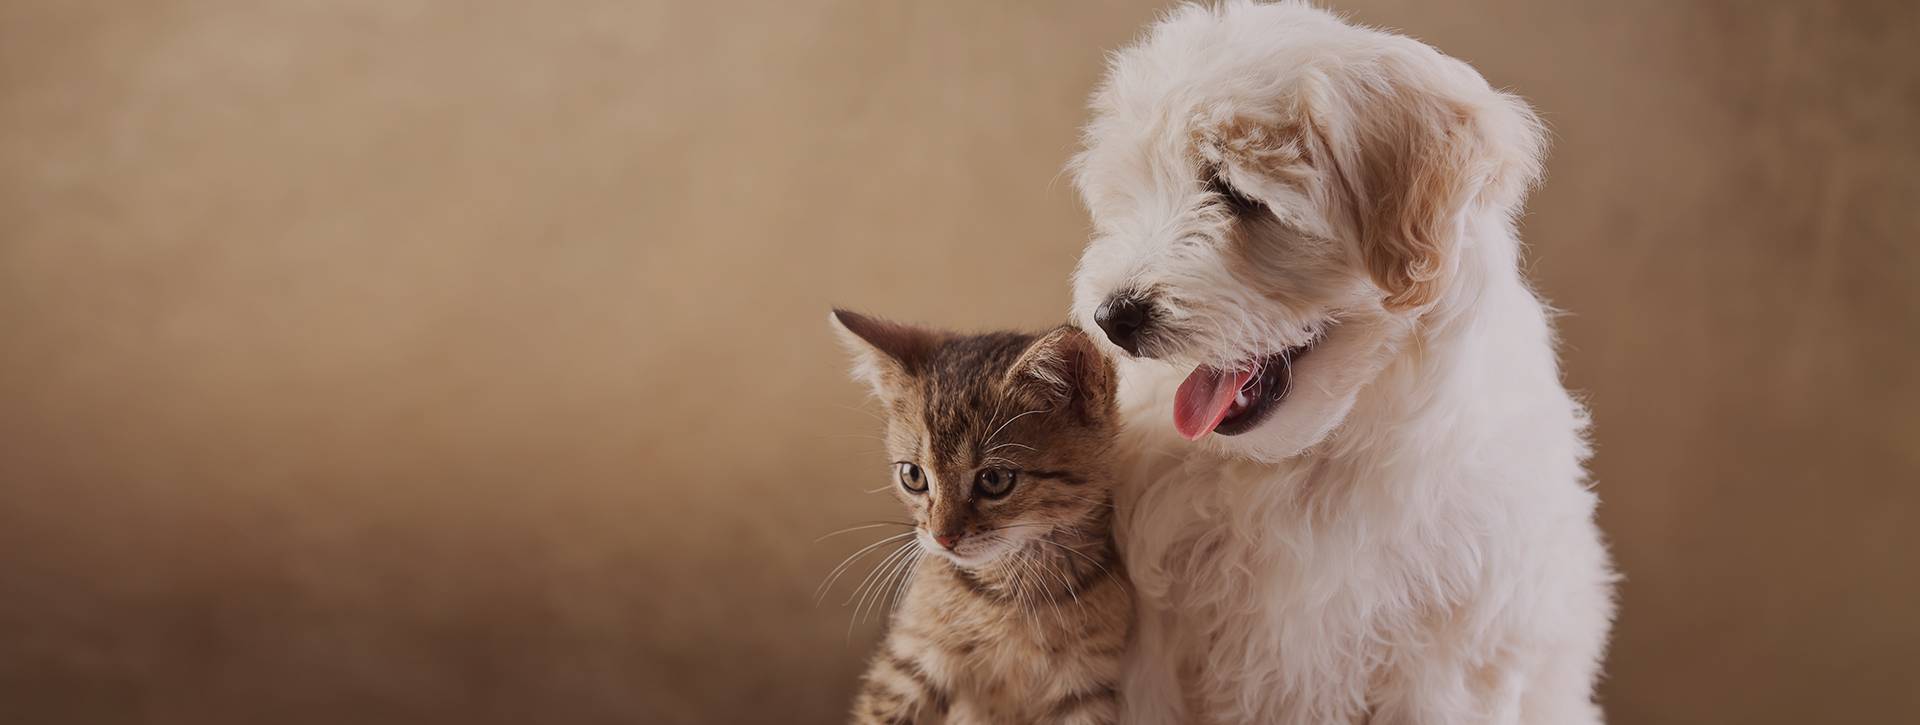 North Iredell Animal Hospital | Statesville's Best Veterinary Care